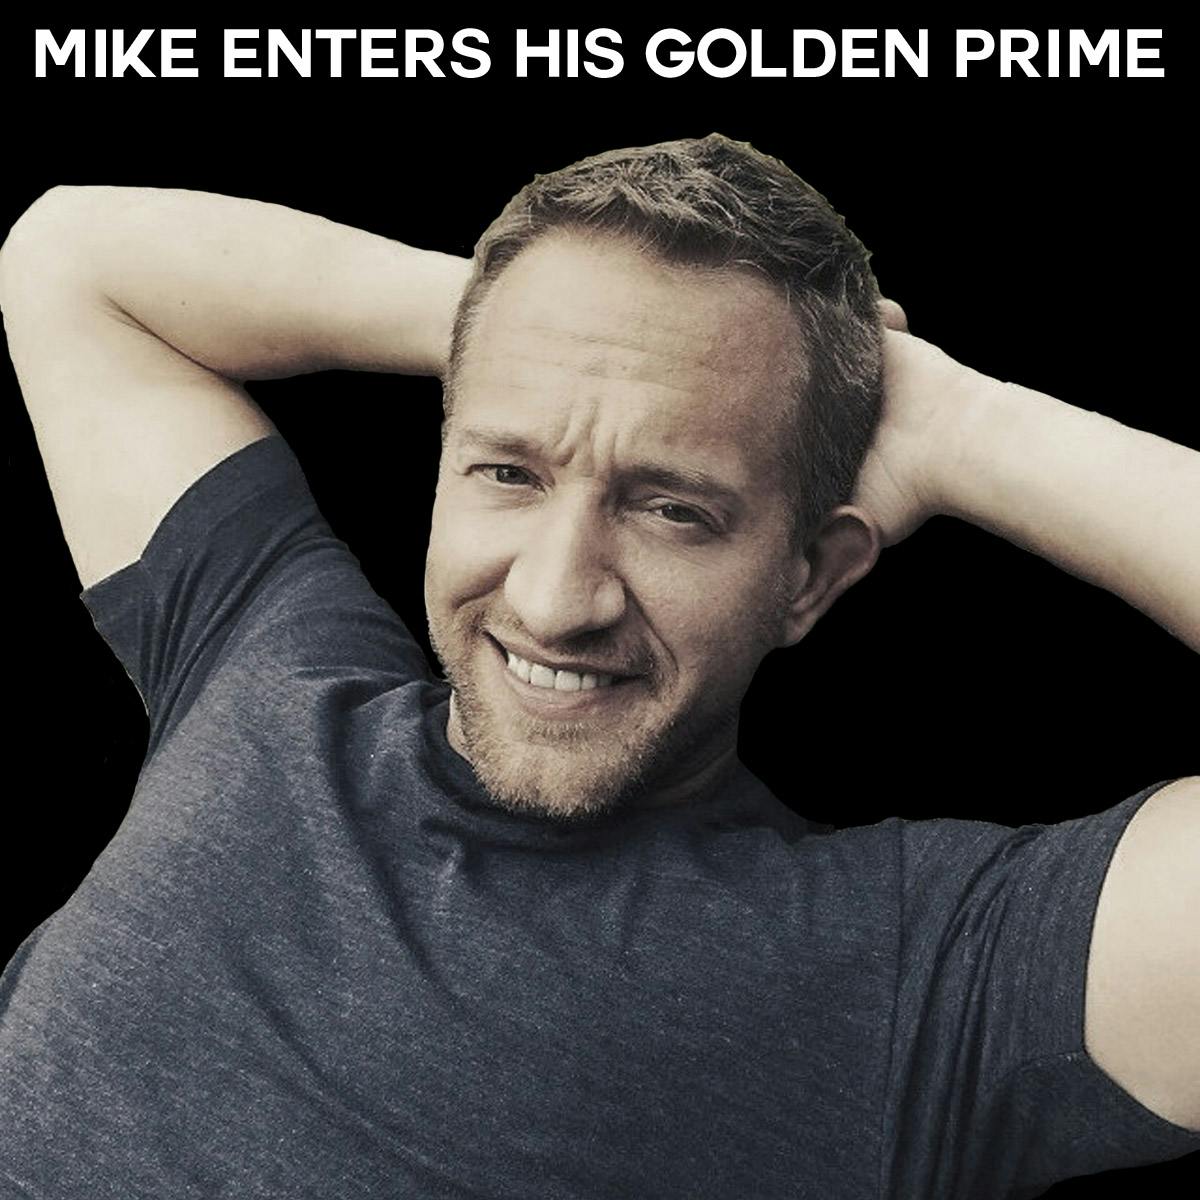 Men In Their 30s Only - Golden Prime